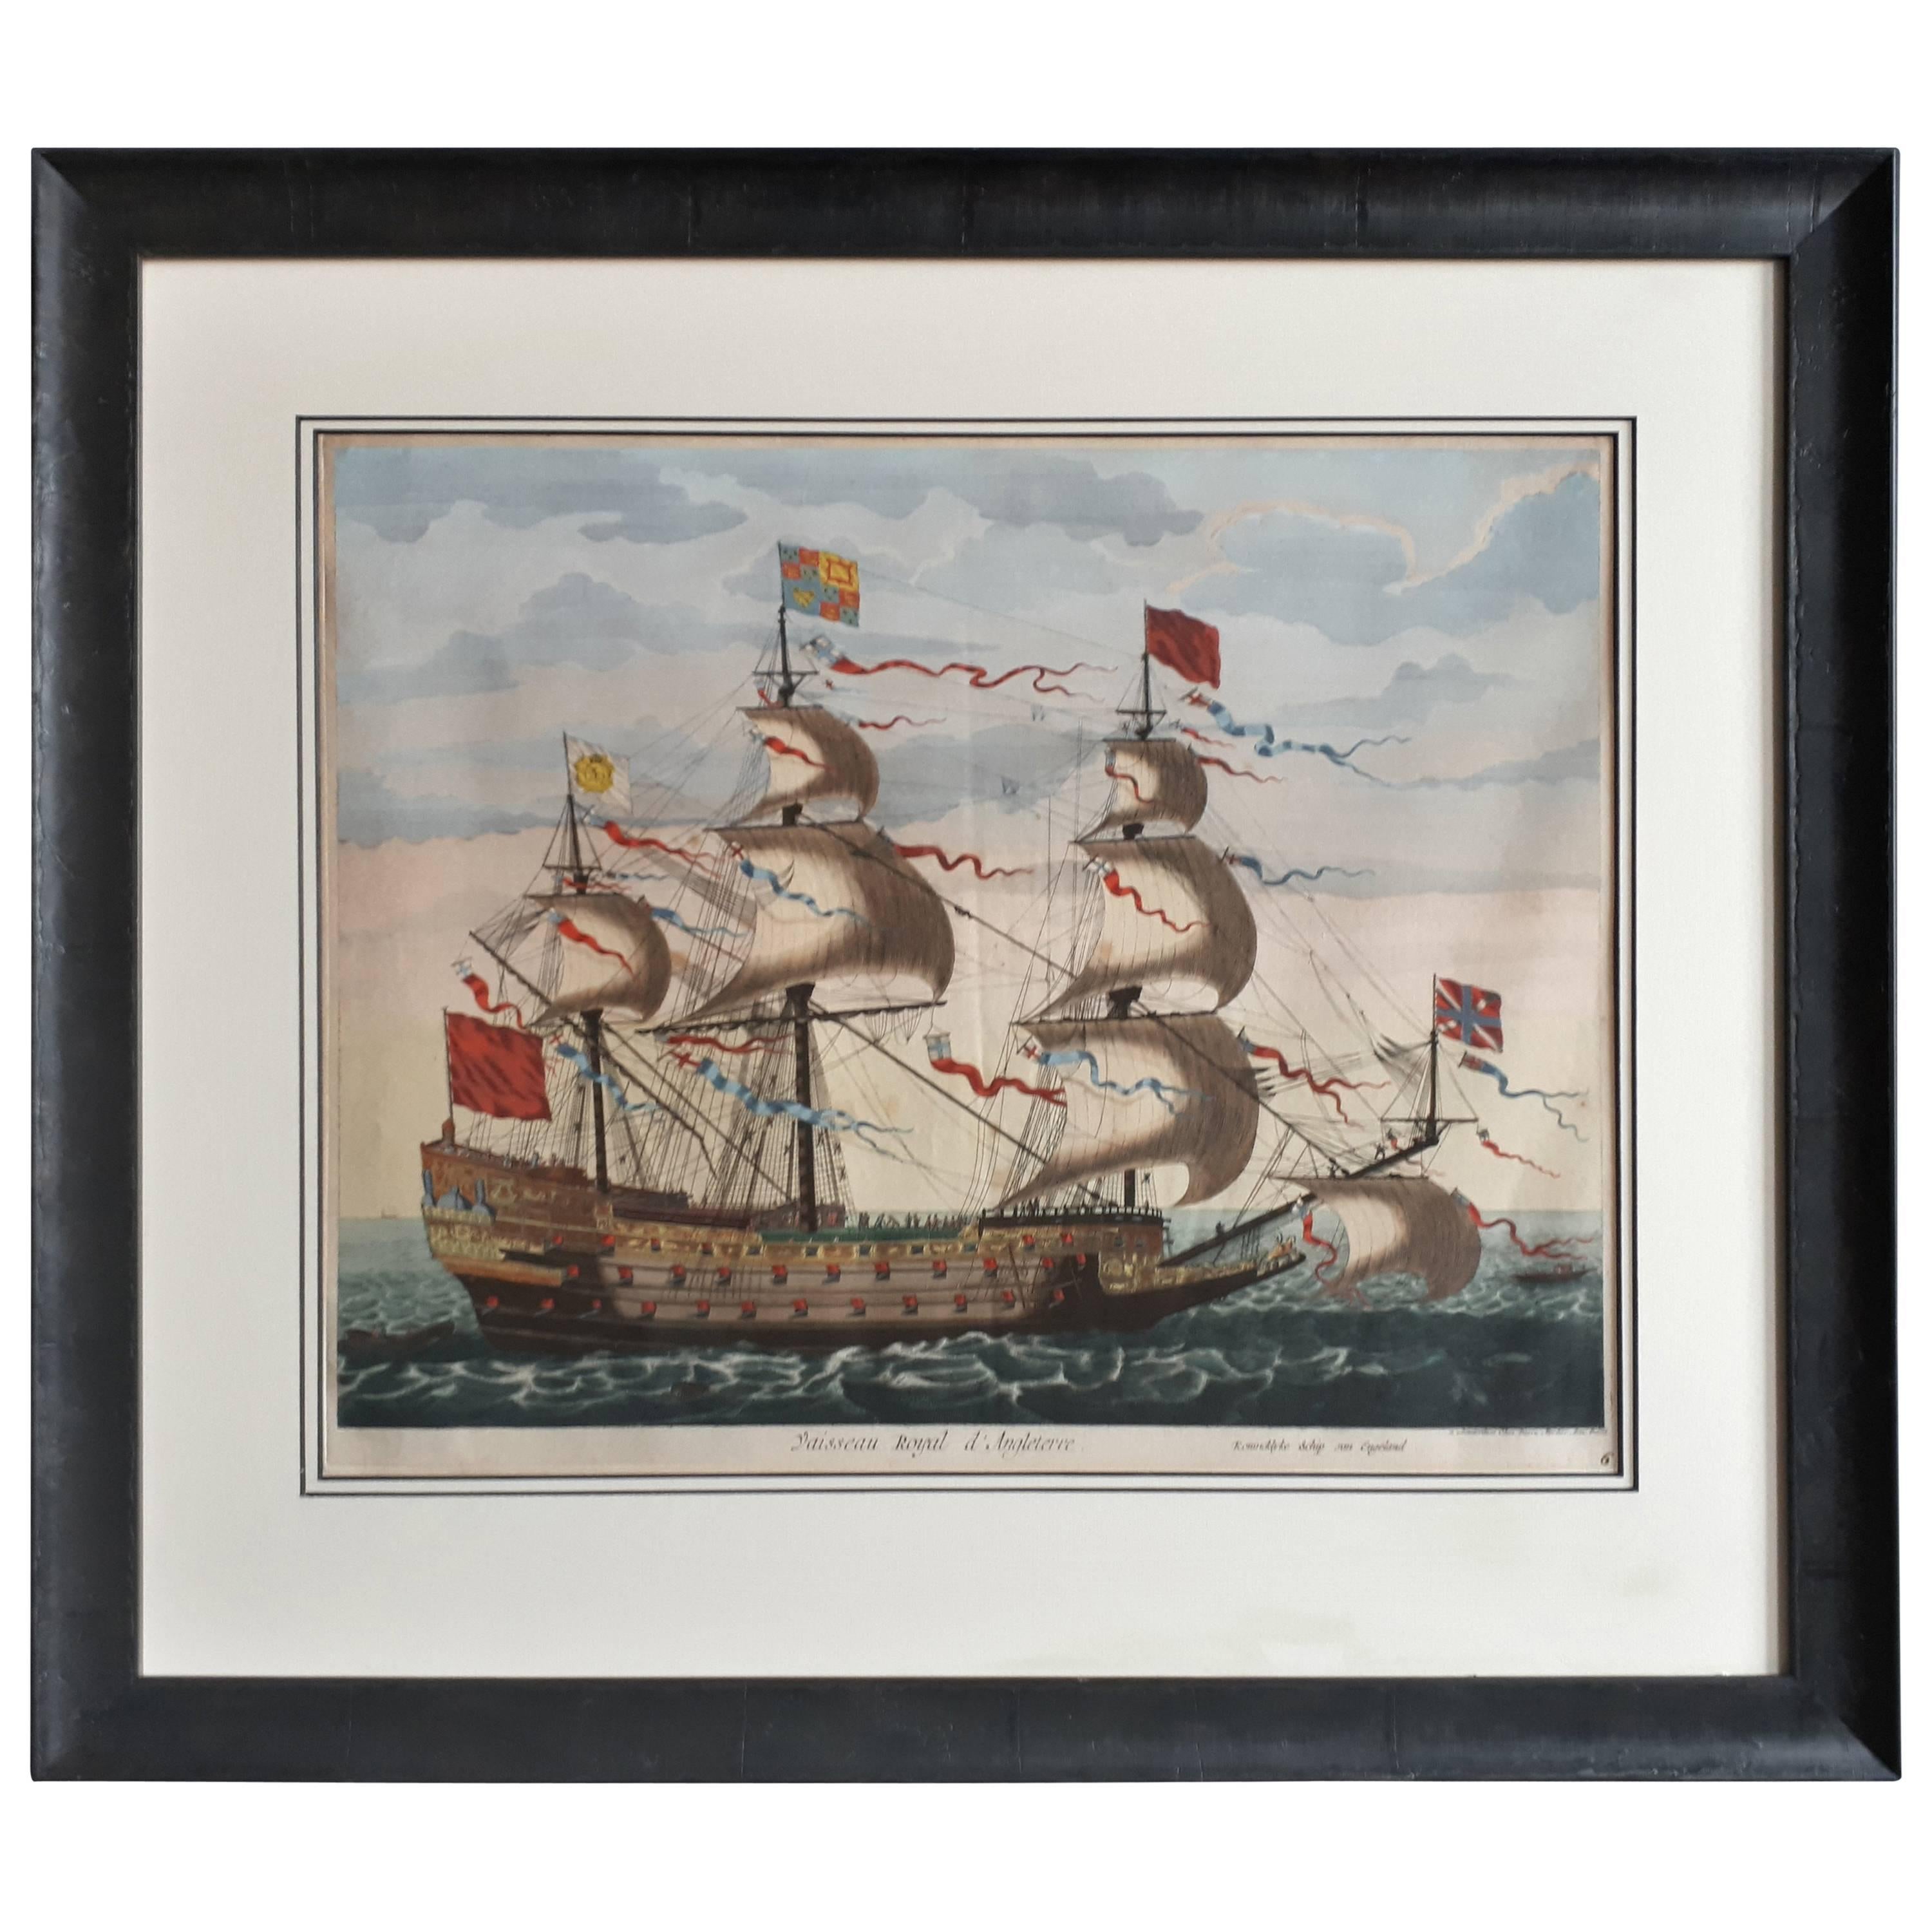 Antique Print of the Royal Flagship of the English Fleet by P. Mortier, c.1693